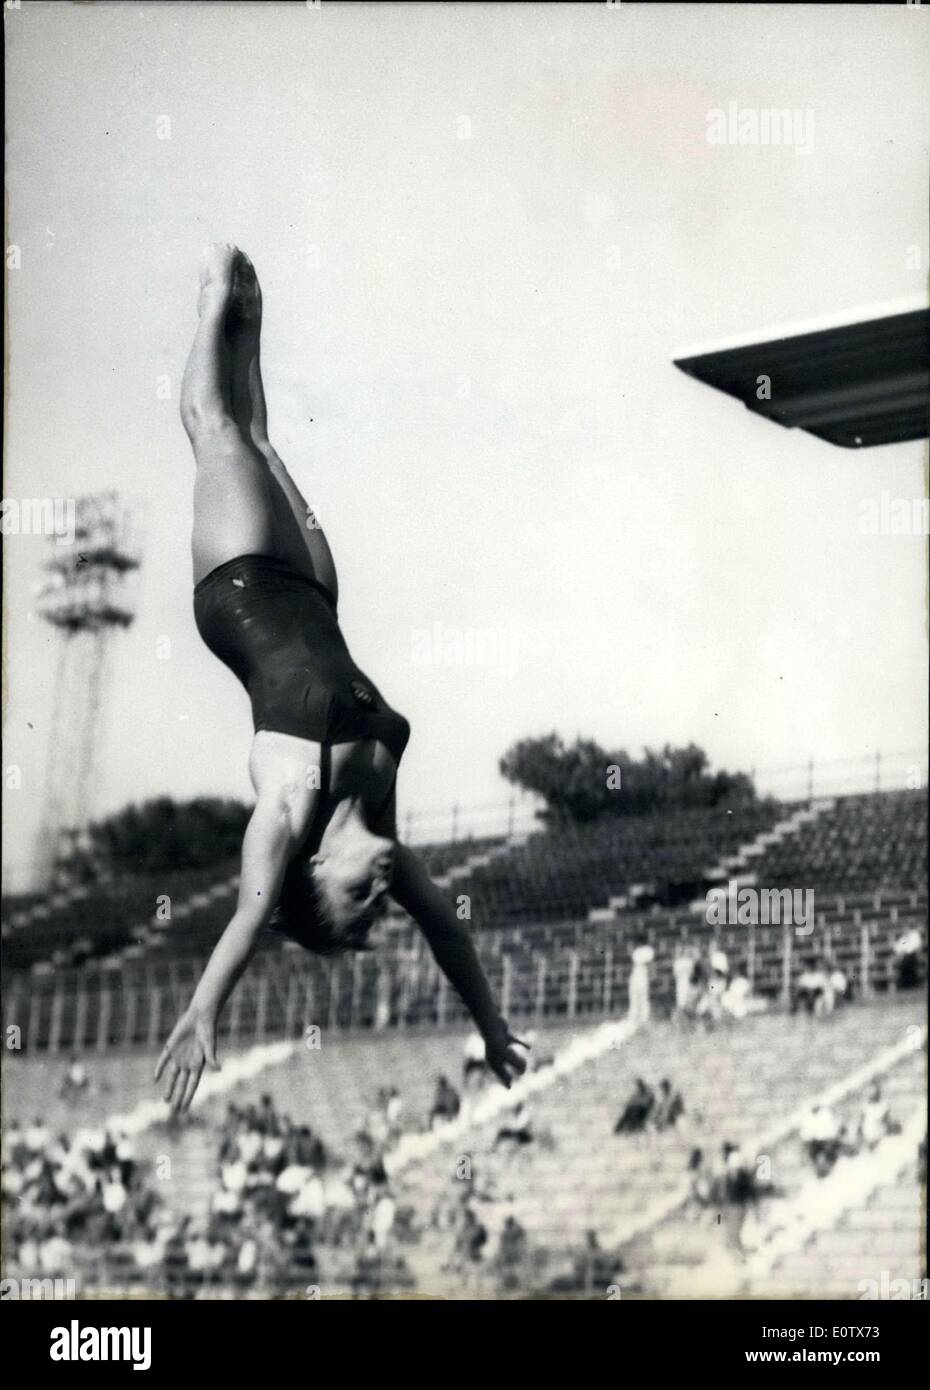 Aug. 29, 1960 - Ingrid Kramer, the seventeen year old high schooler from Dresden won the first gold medal for Germany in diving. Stock Photo